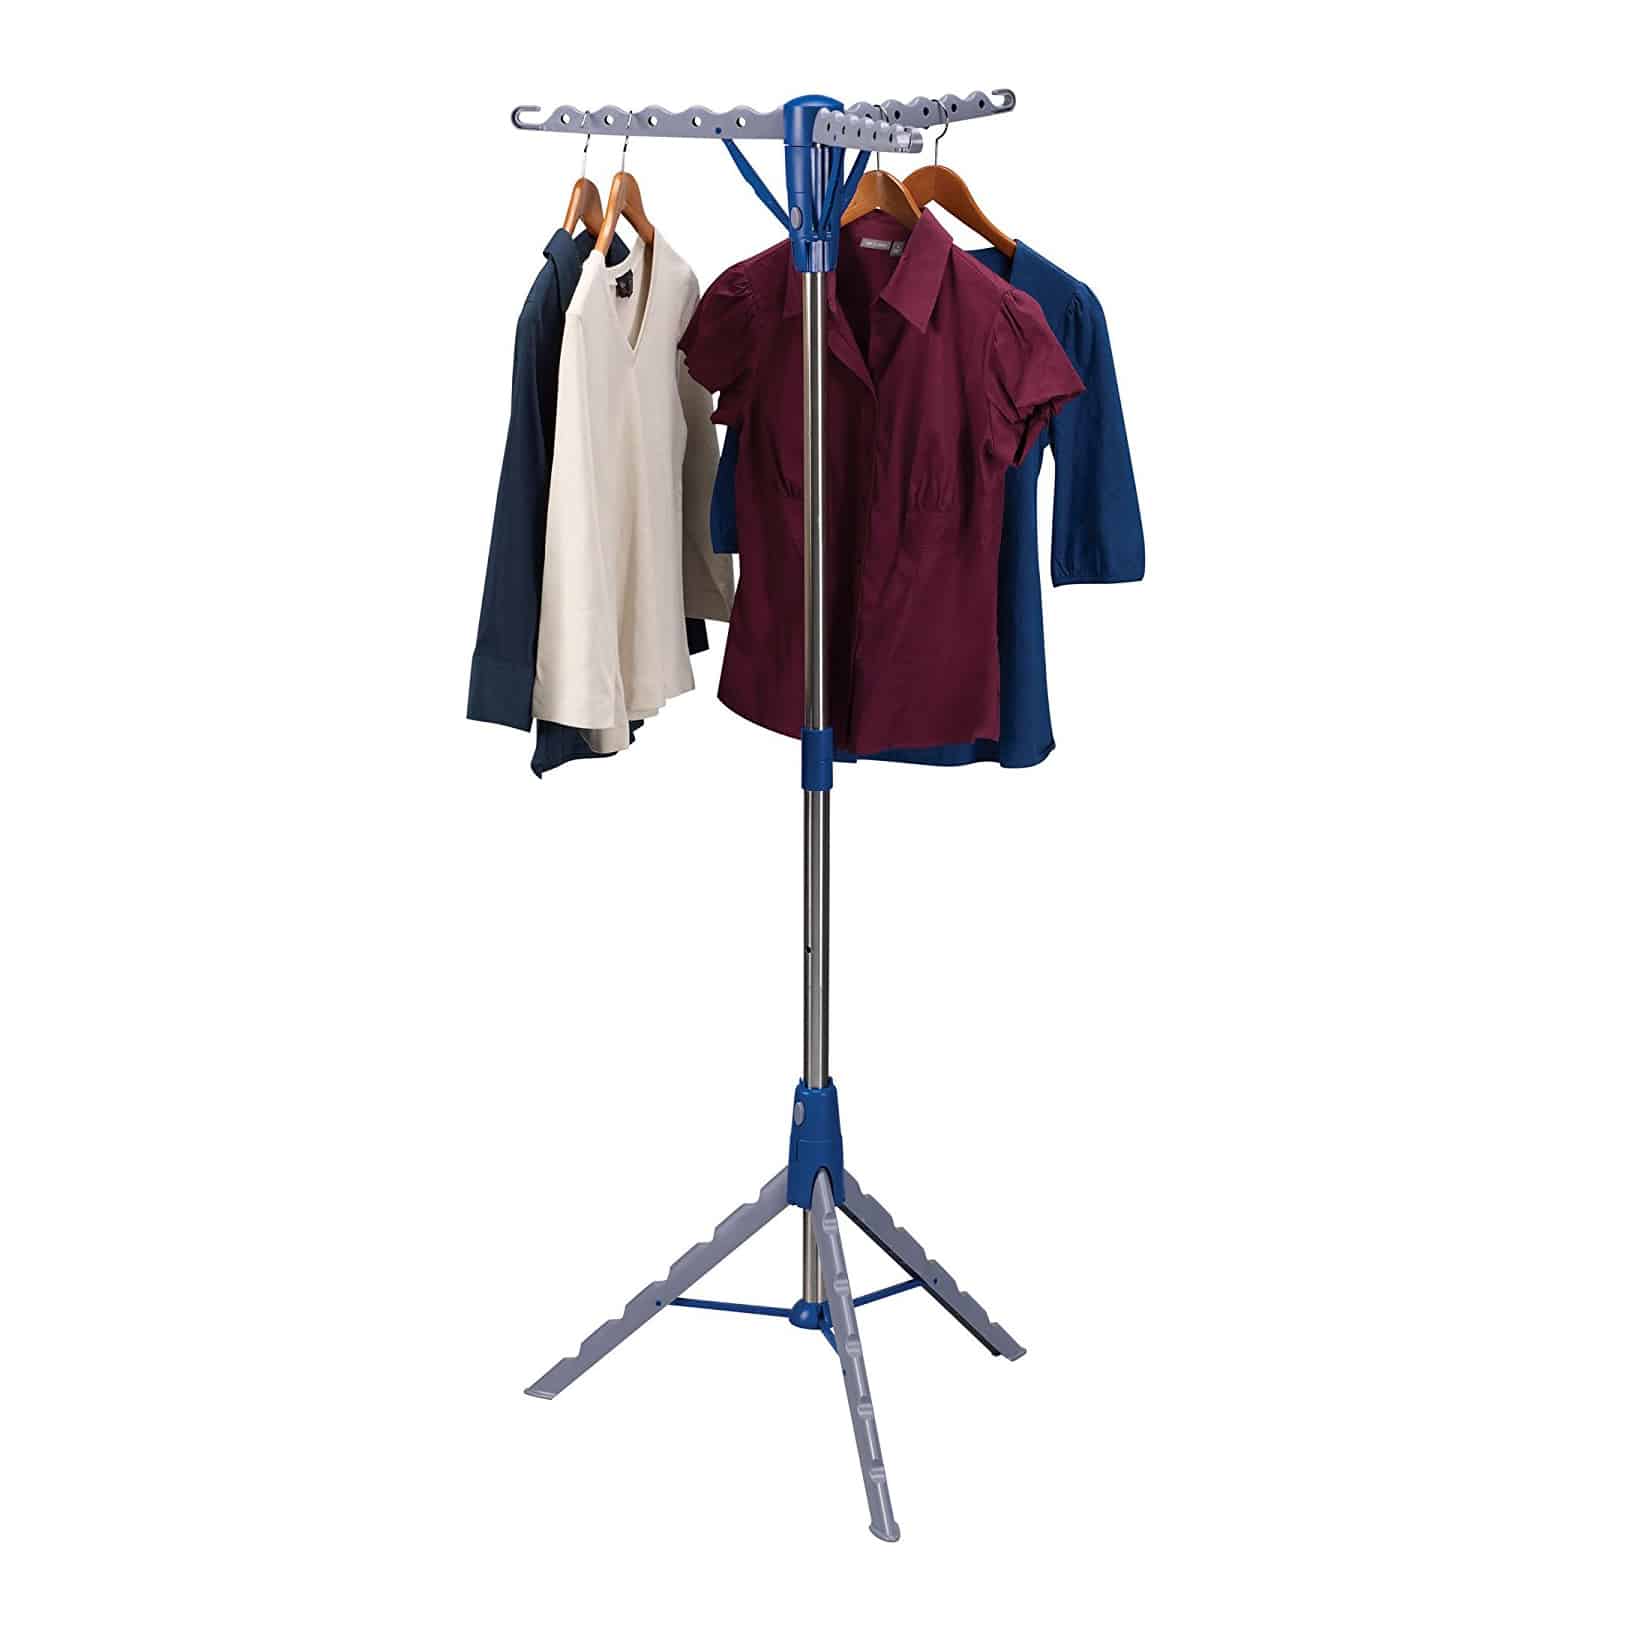 Top 10 Best Clothes Drying Racks in 2023 - Best Reviews Guide